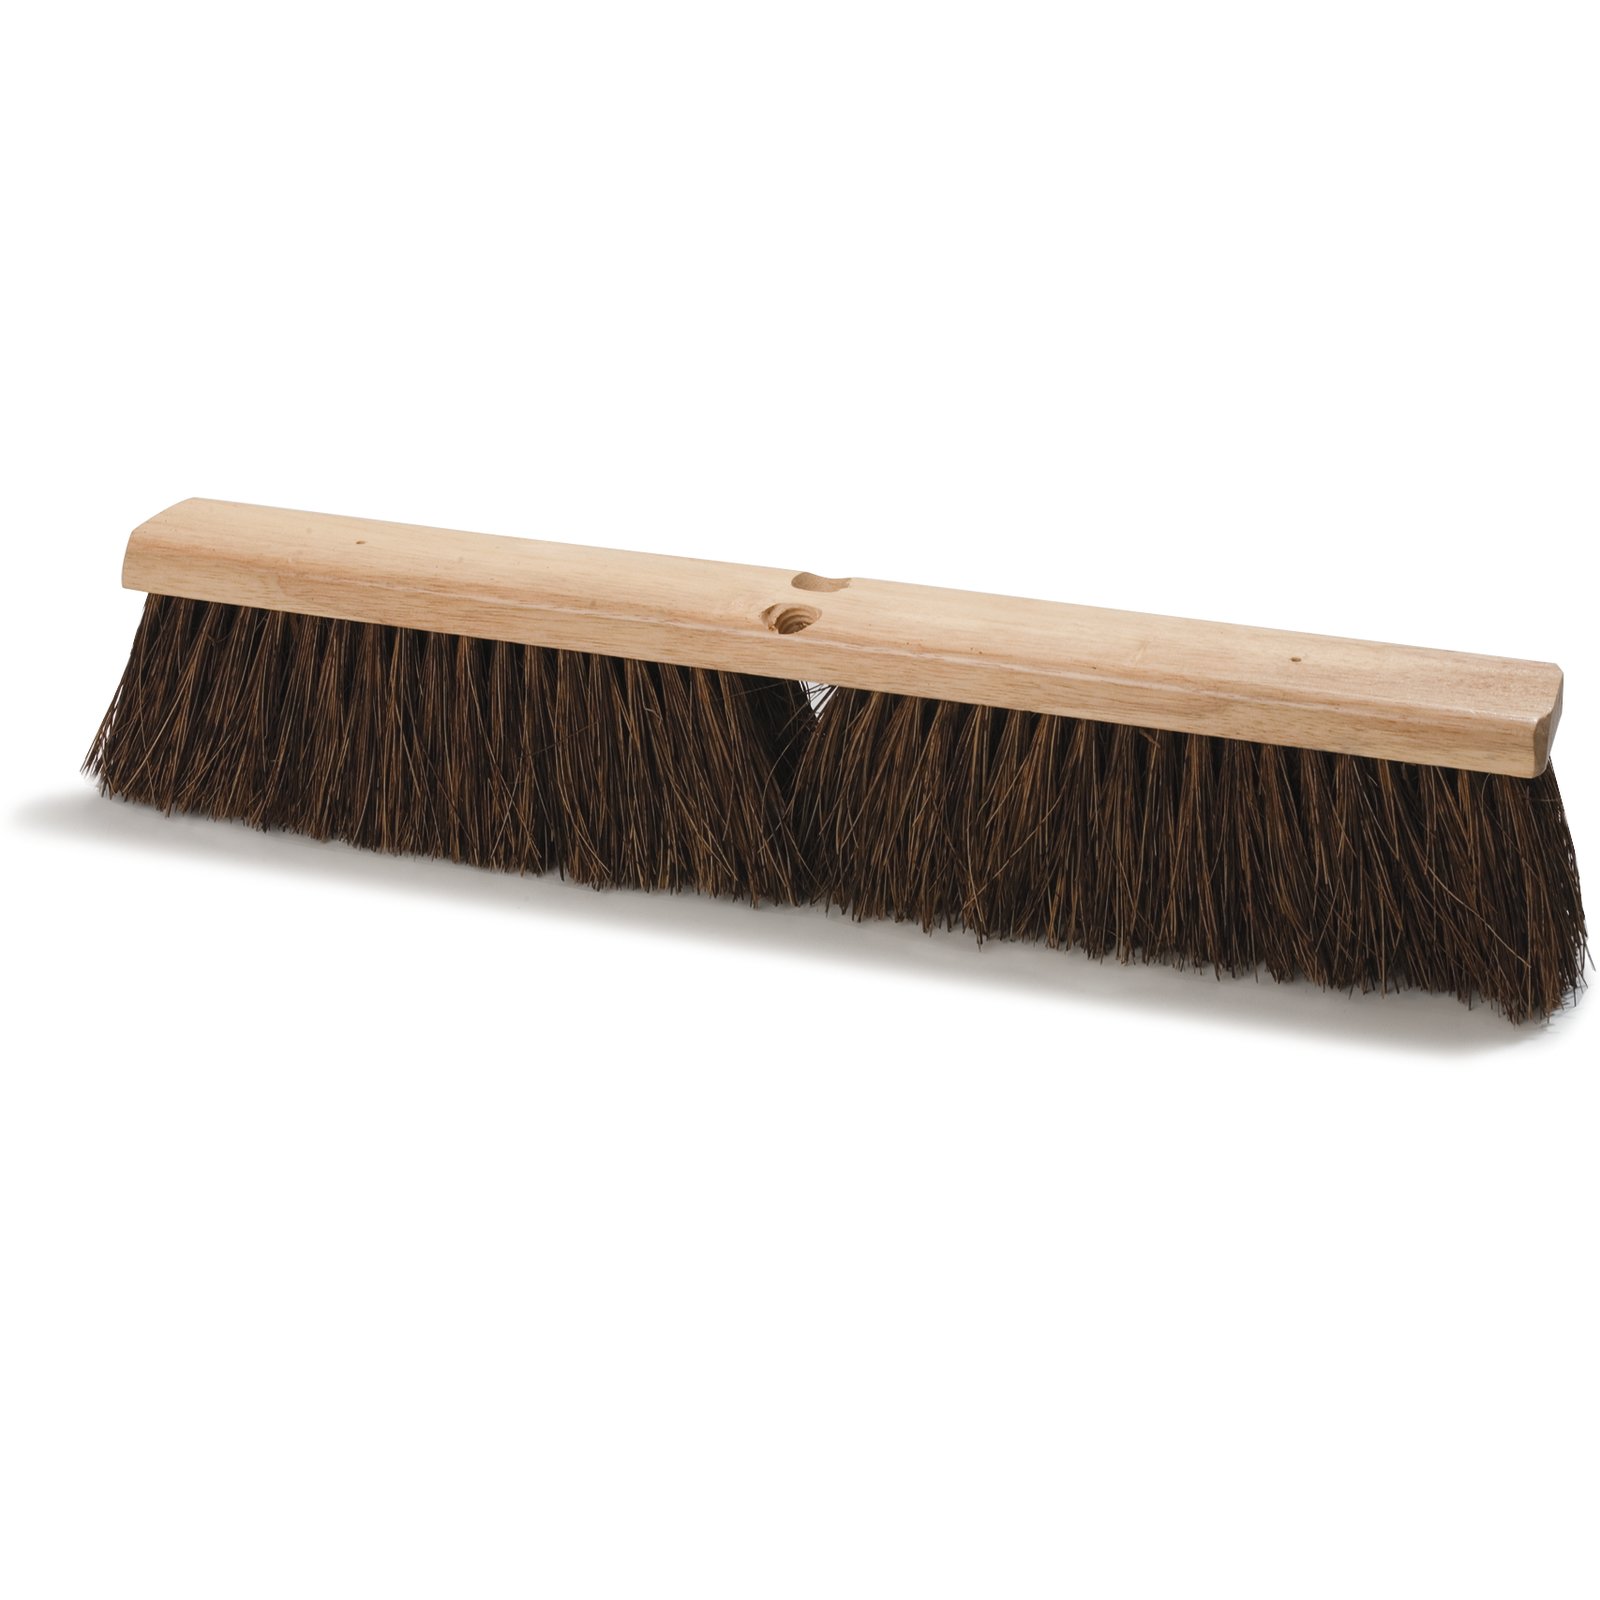 Shop Salter Floor Brooms and Cleaning Brushes – Order Online